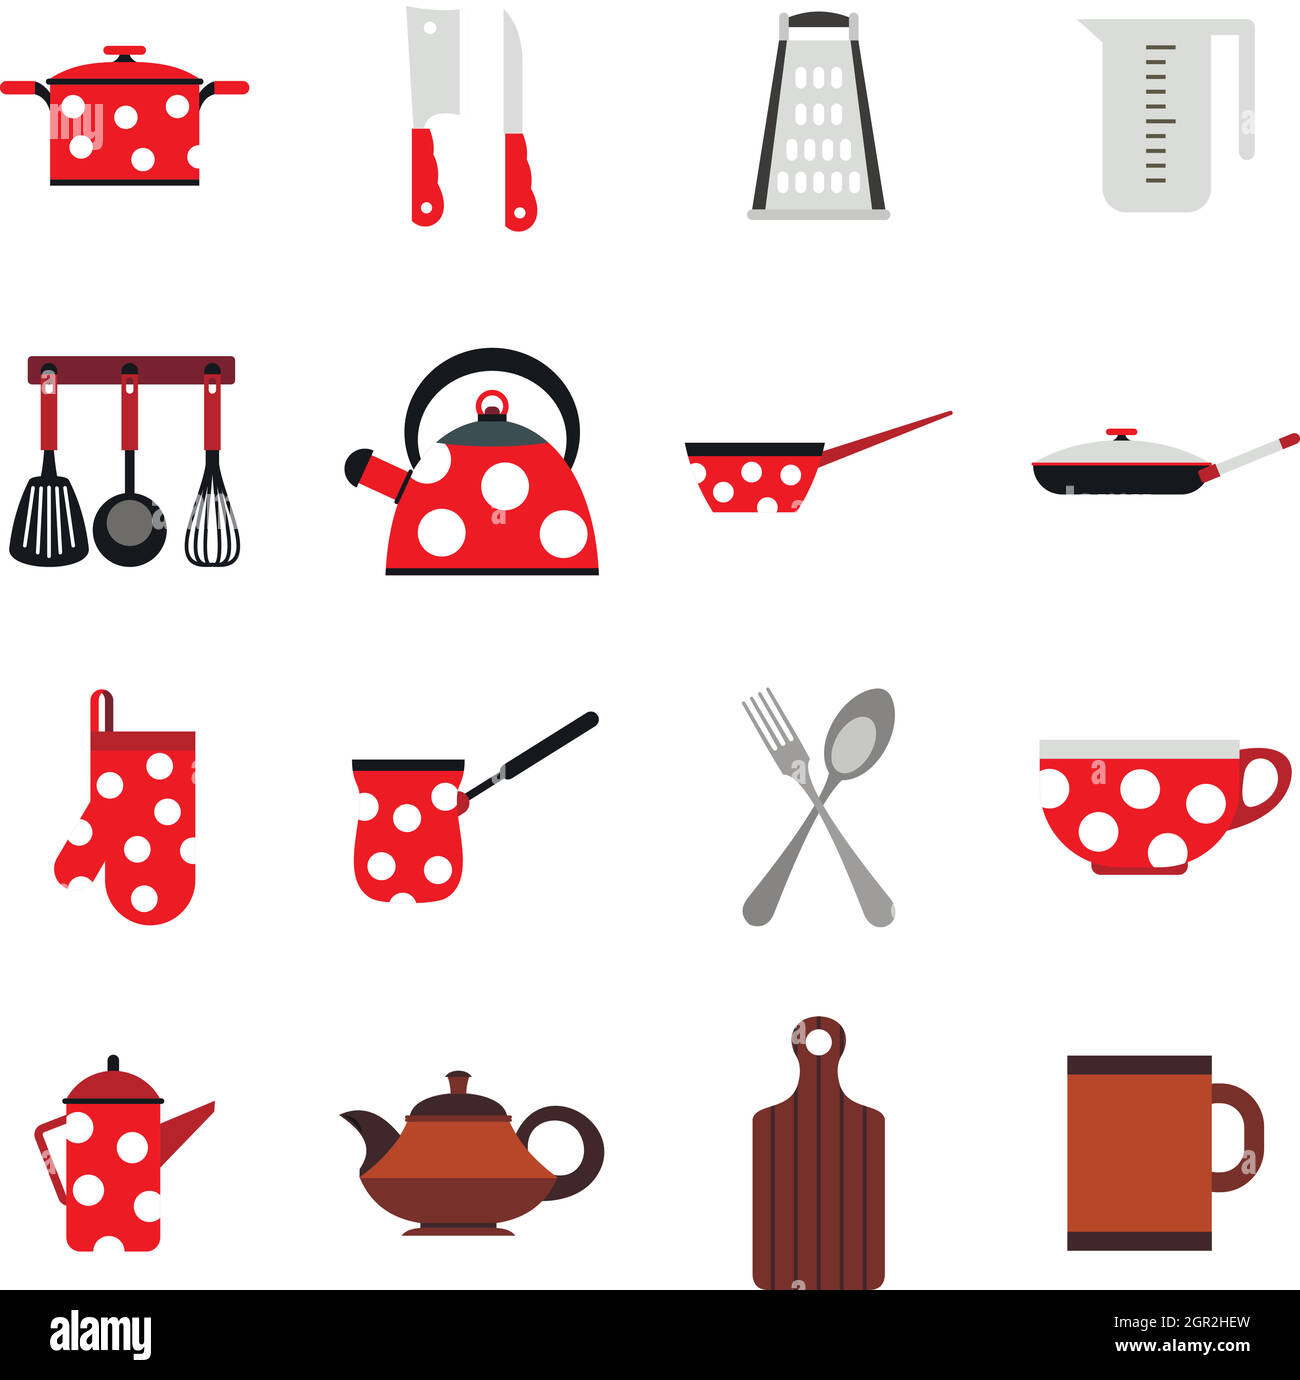 https://c8.alamy.com/comp/2GR2HEW/kitchen-tools-and-utensils-icons-flat-style-2GR2HEW.jpg